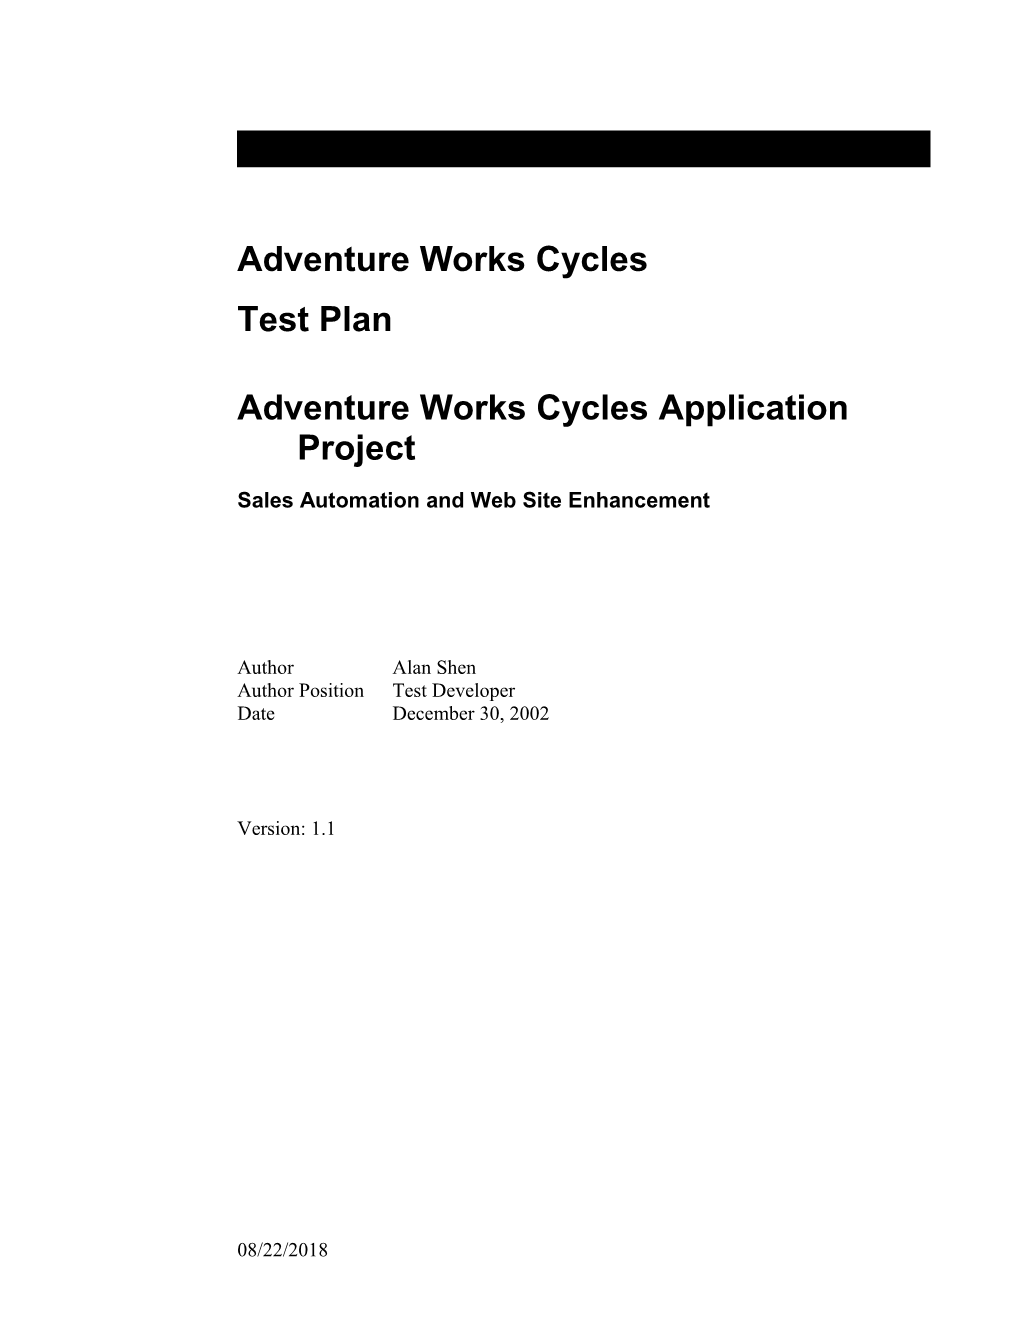 Adventure Works Cycles Application Project